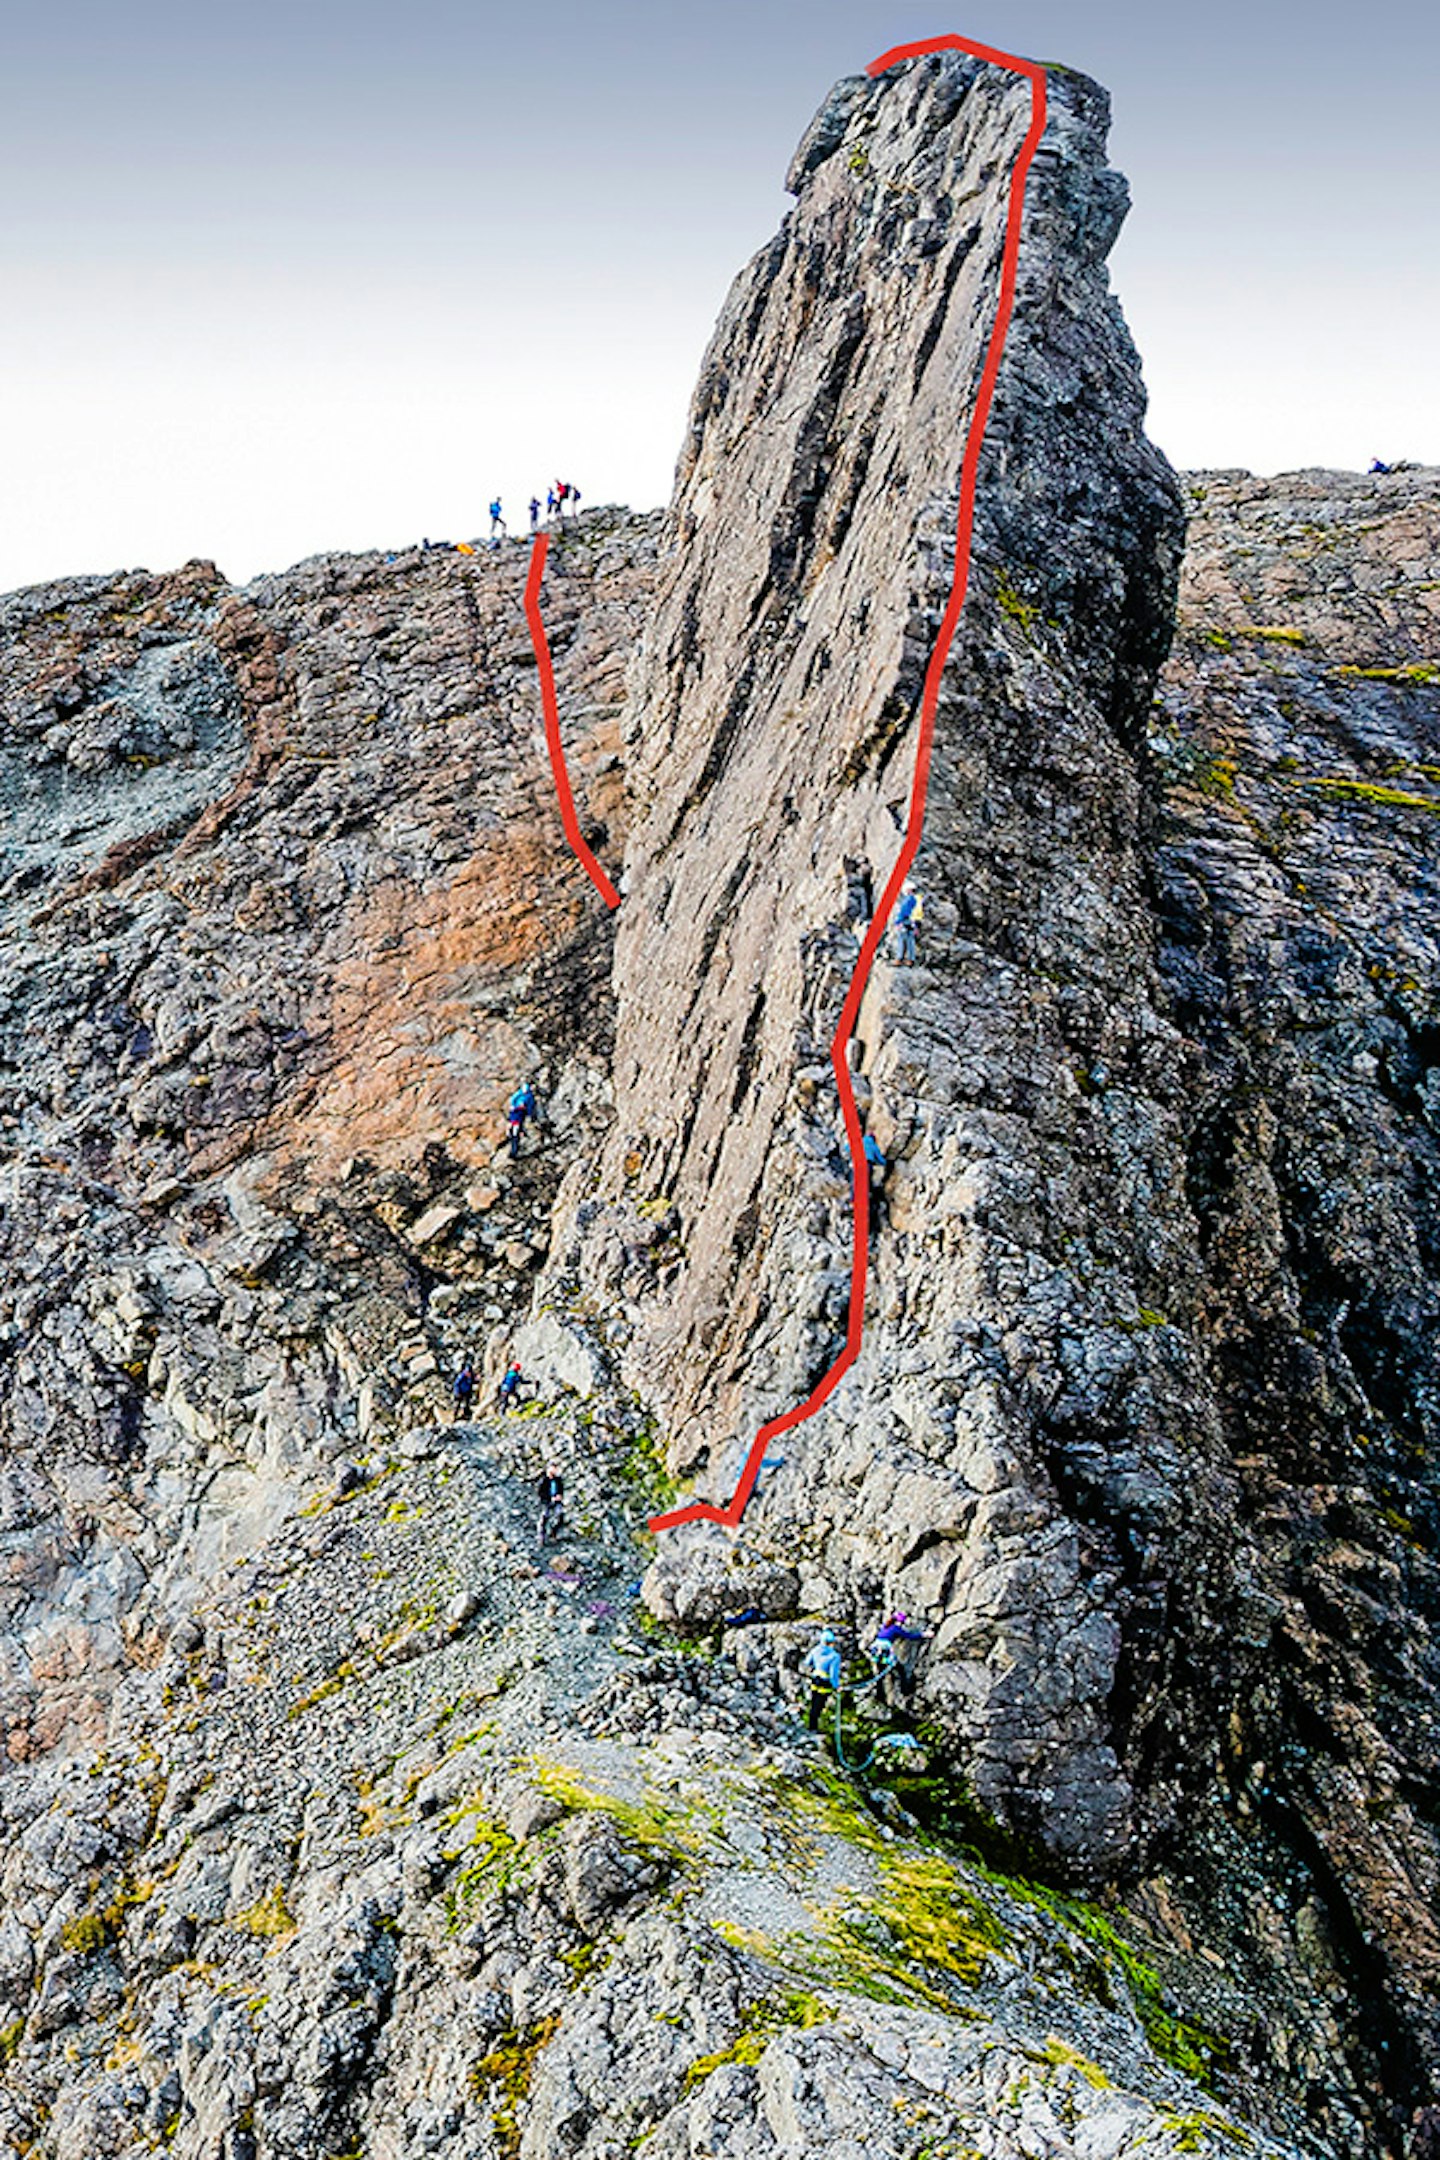 The route over the In Pinn and up onto Sgùrr Dearg’s top (abseil out of sight).